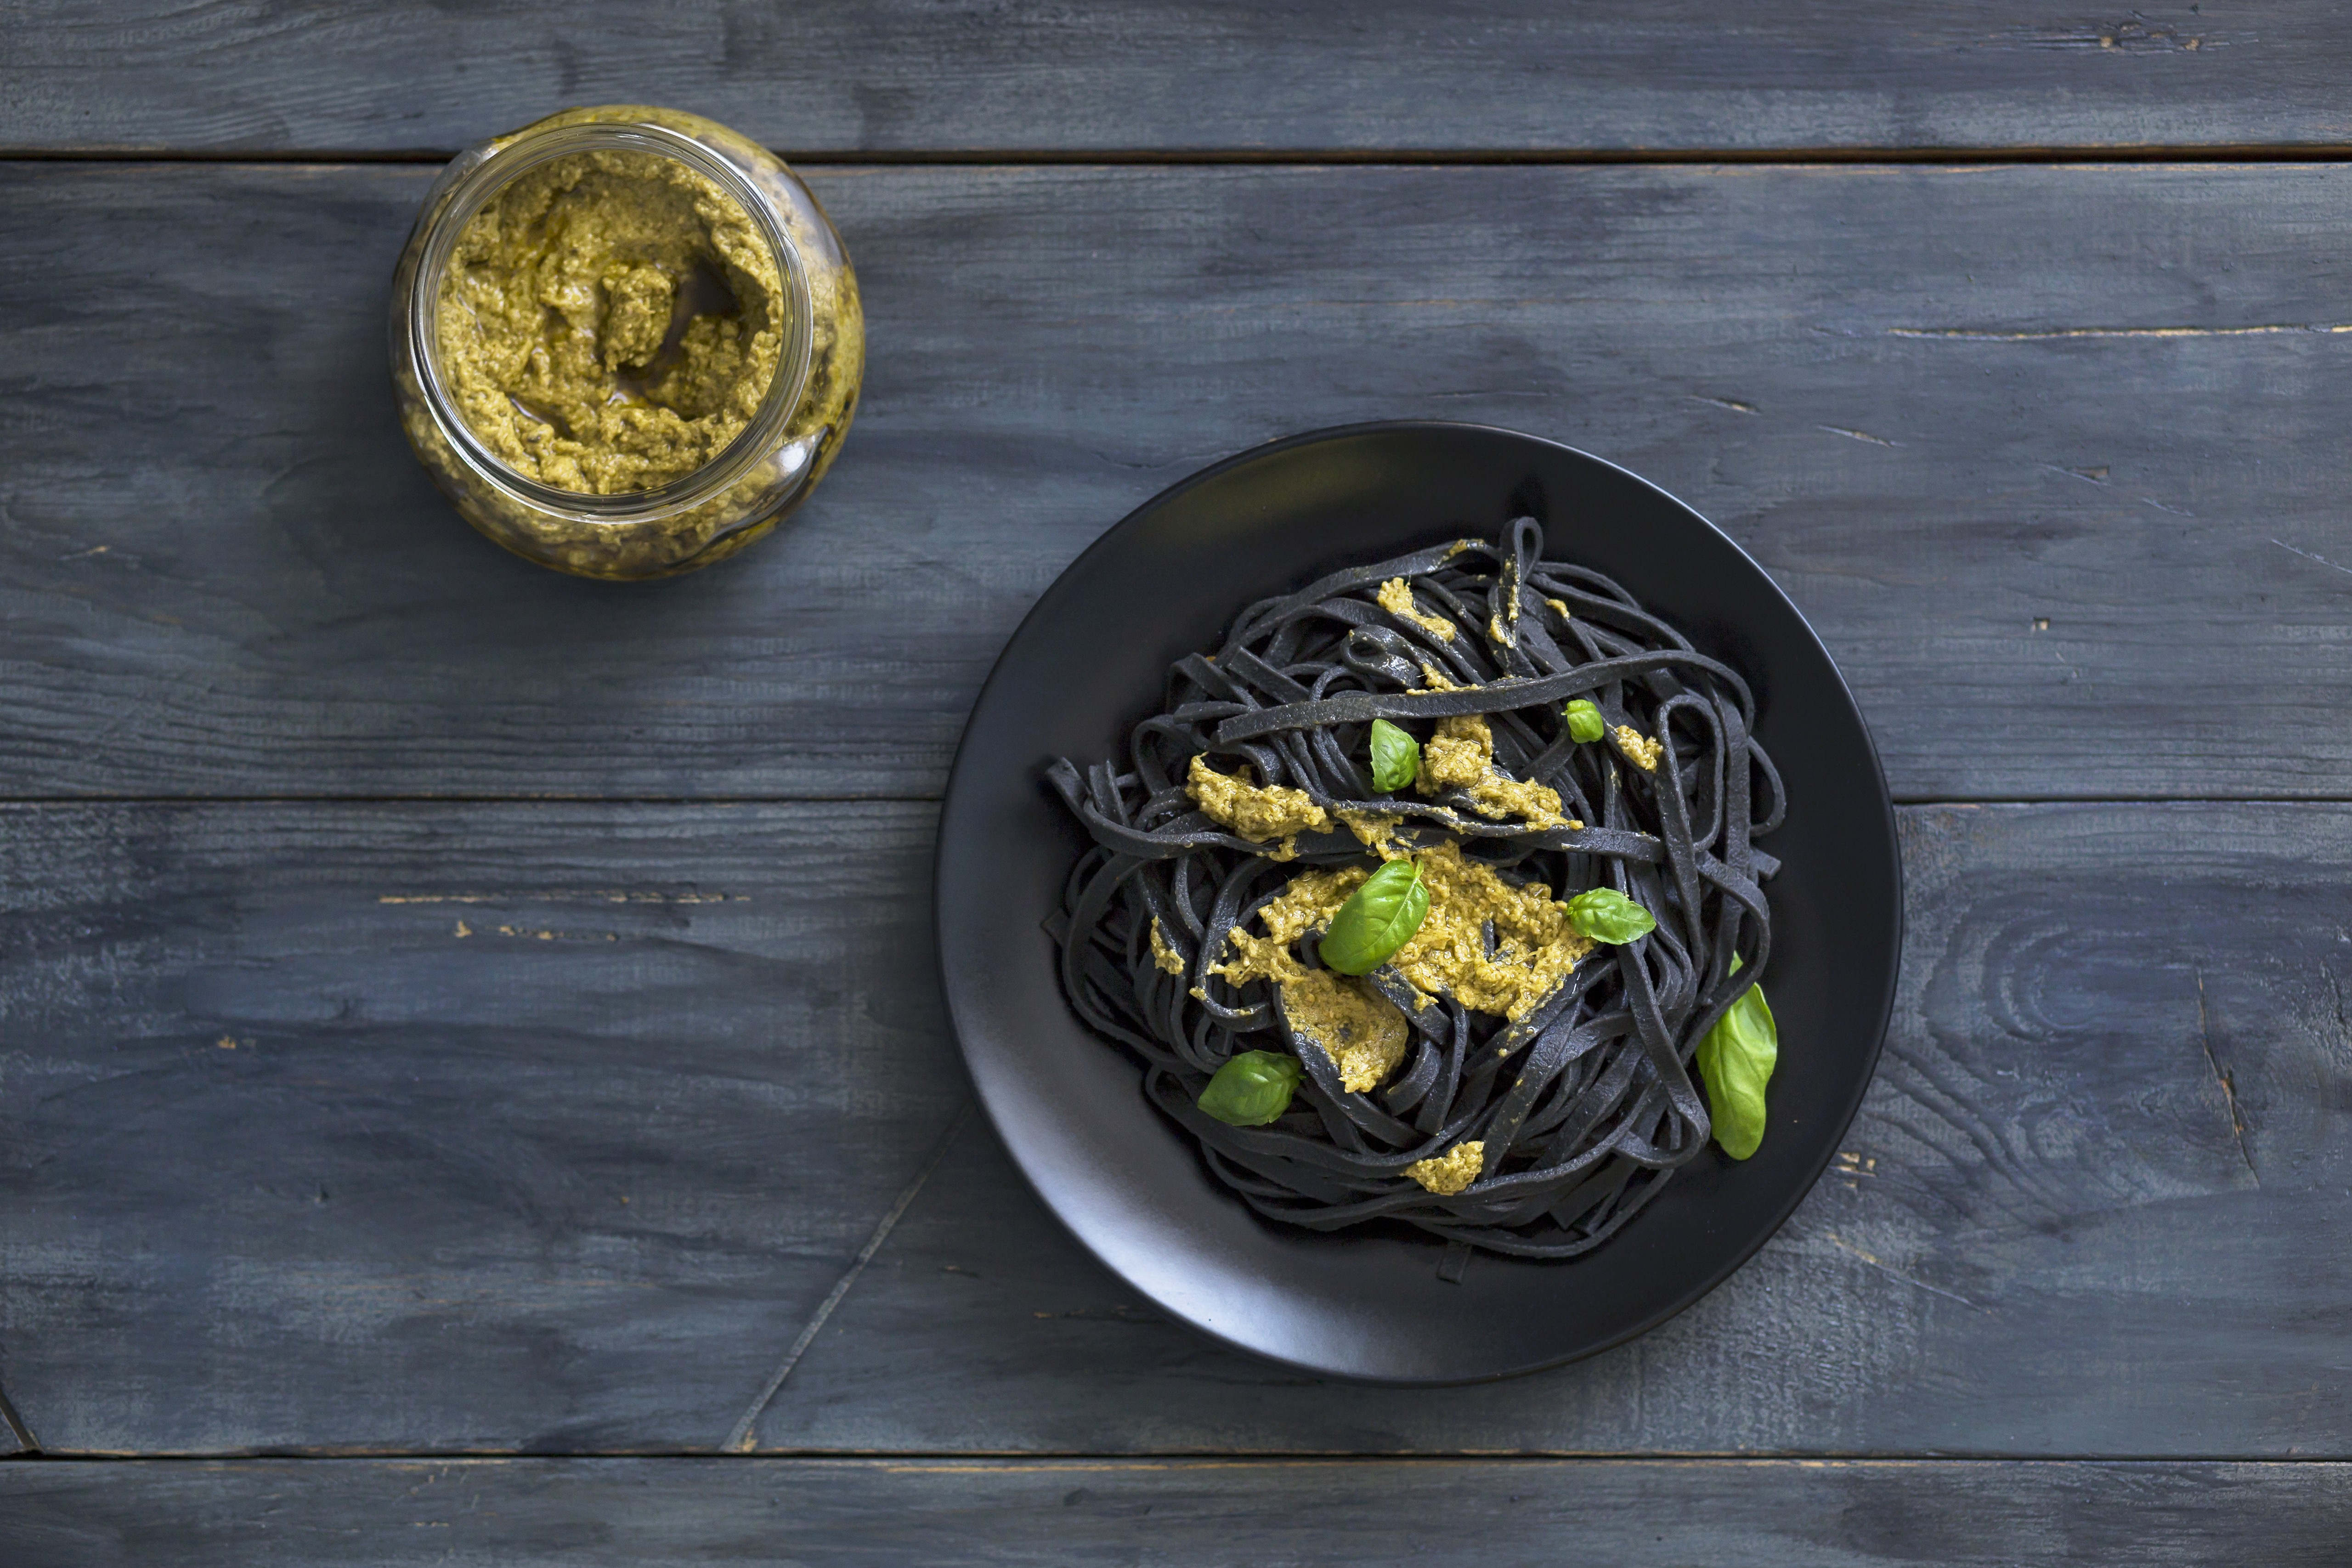 What Are the Benefits of Squid Ink?